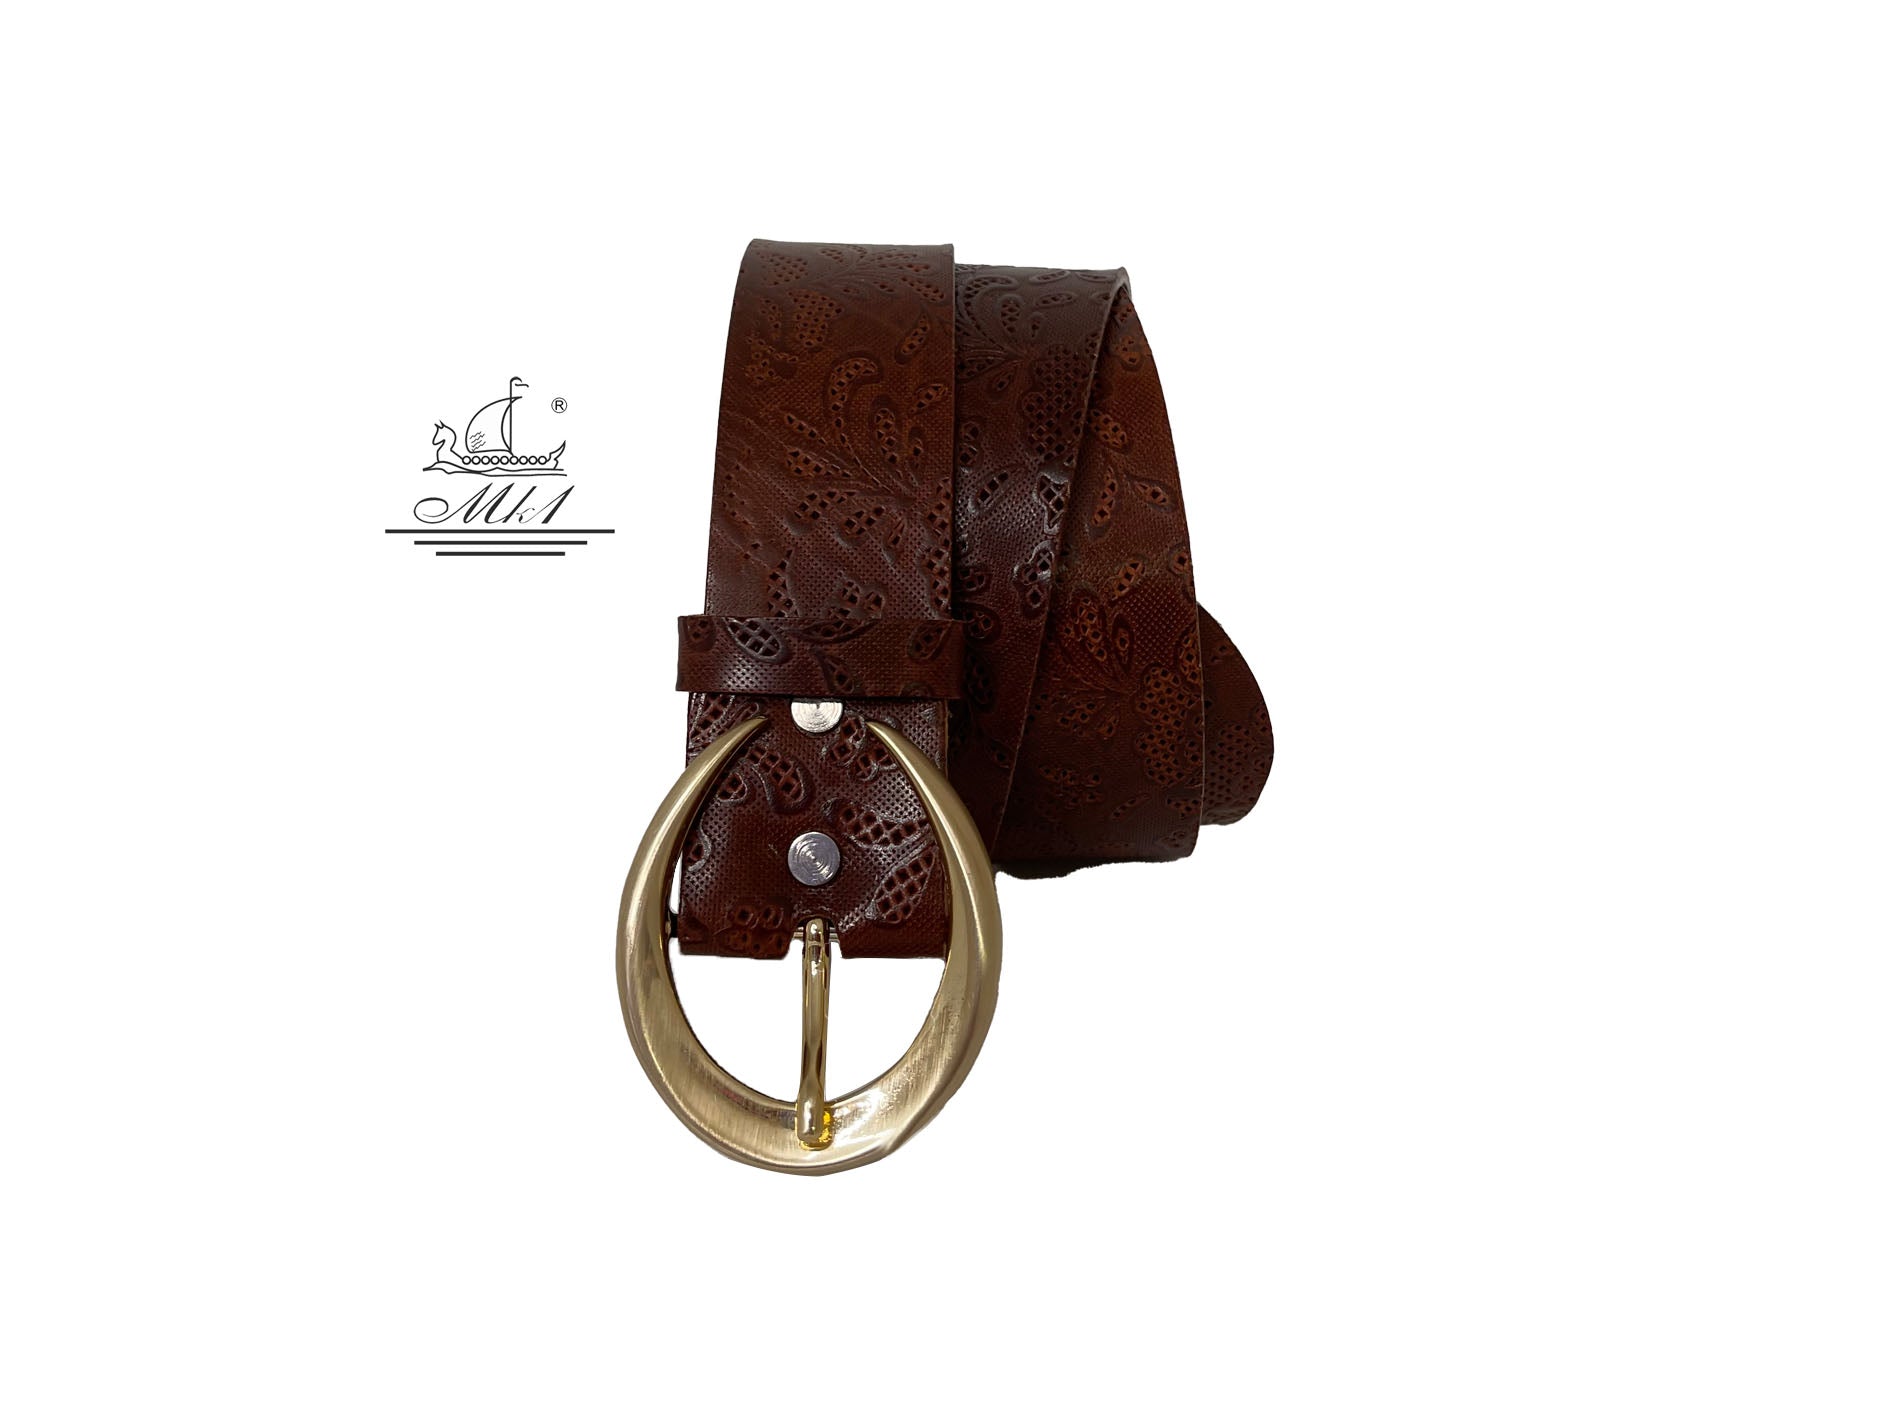 Unisex 4cm wide belt handcrafted from brown leather with flower design. 101589/40BR/LD